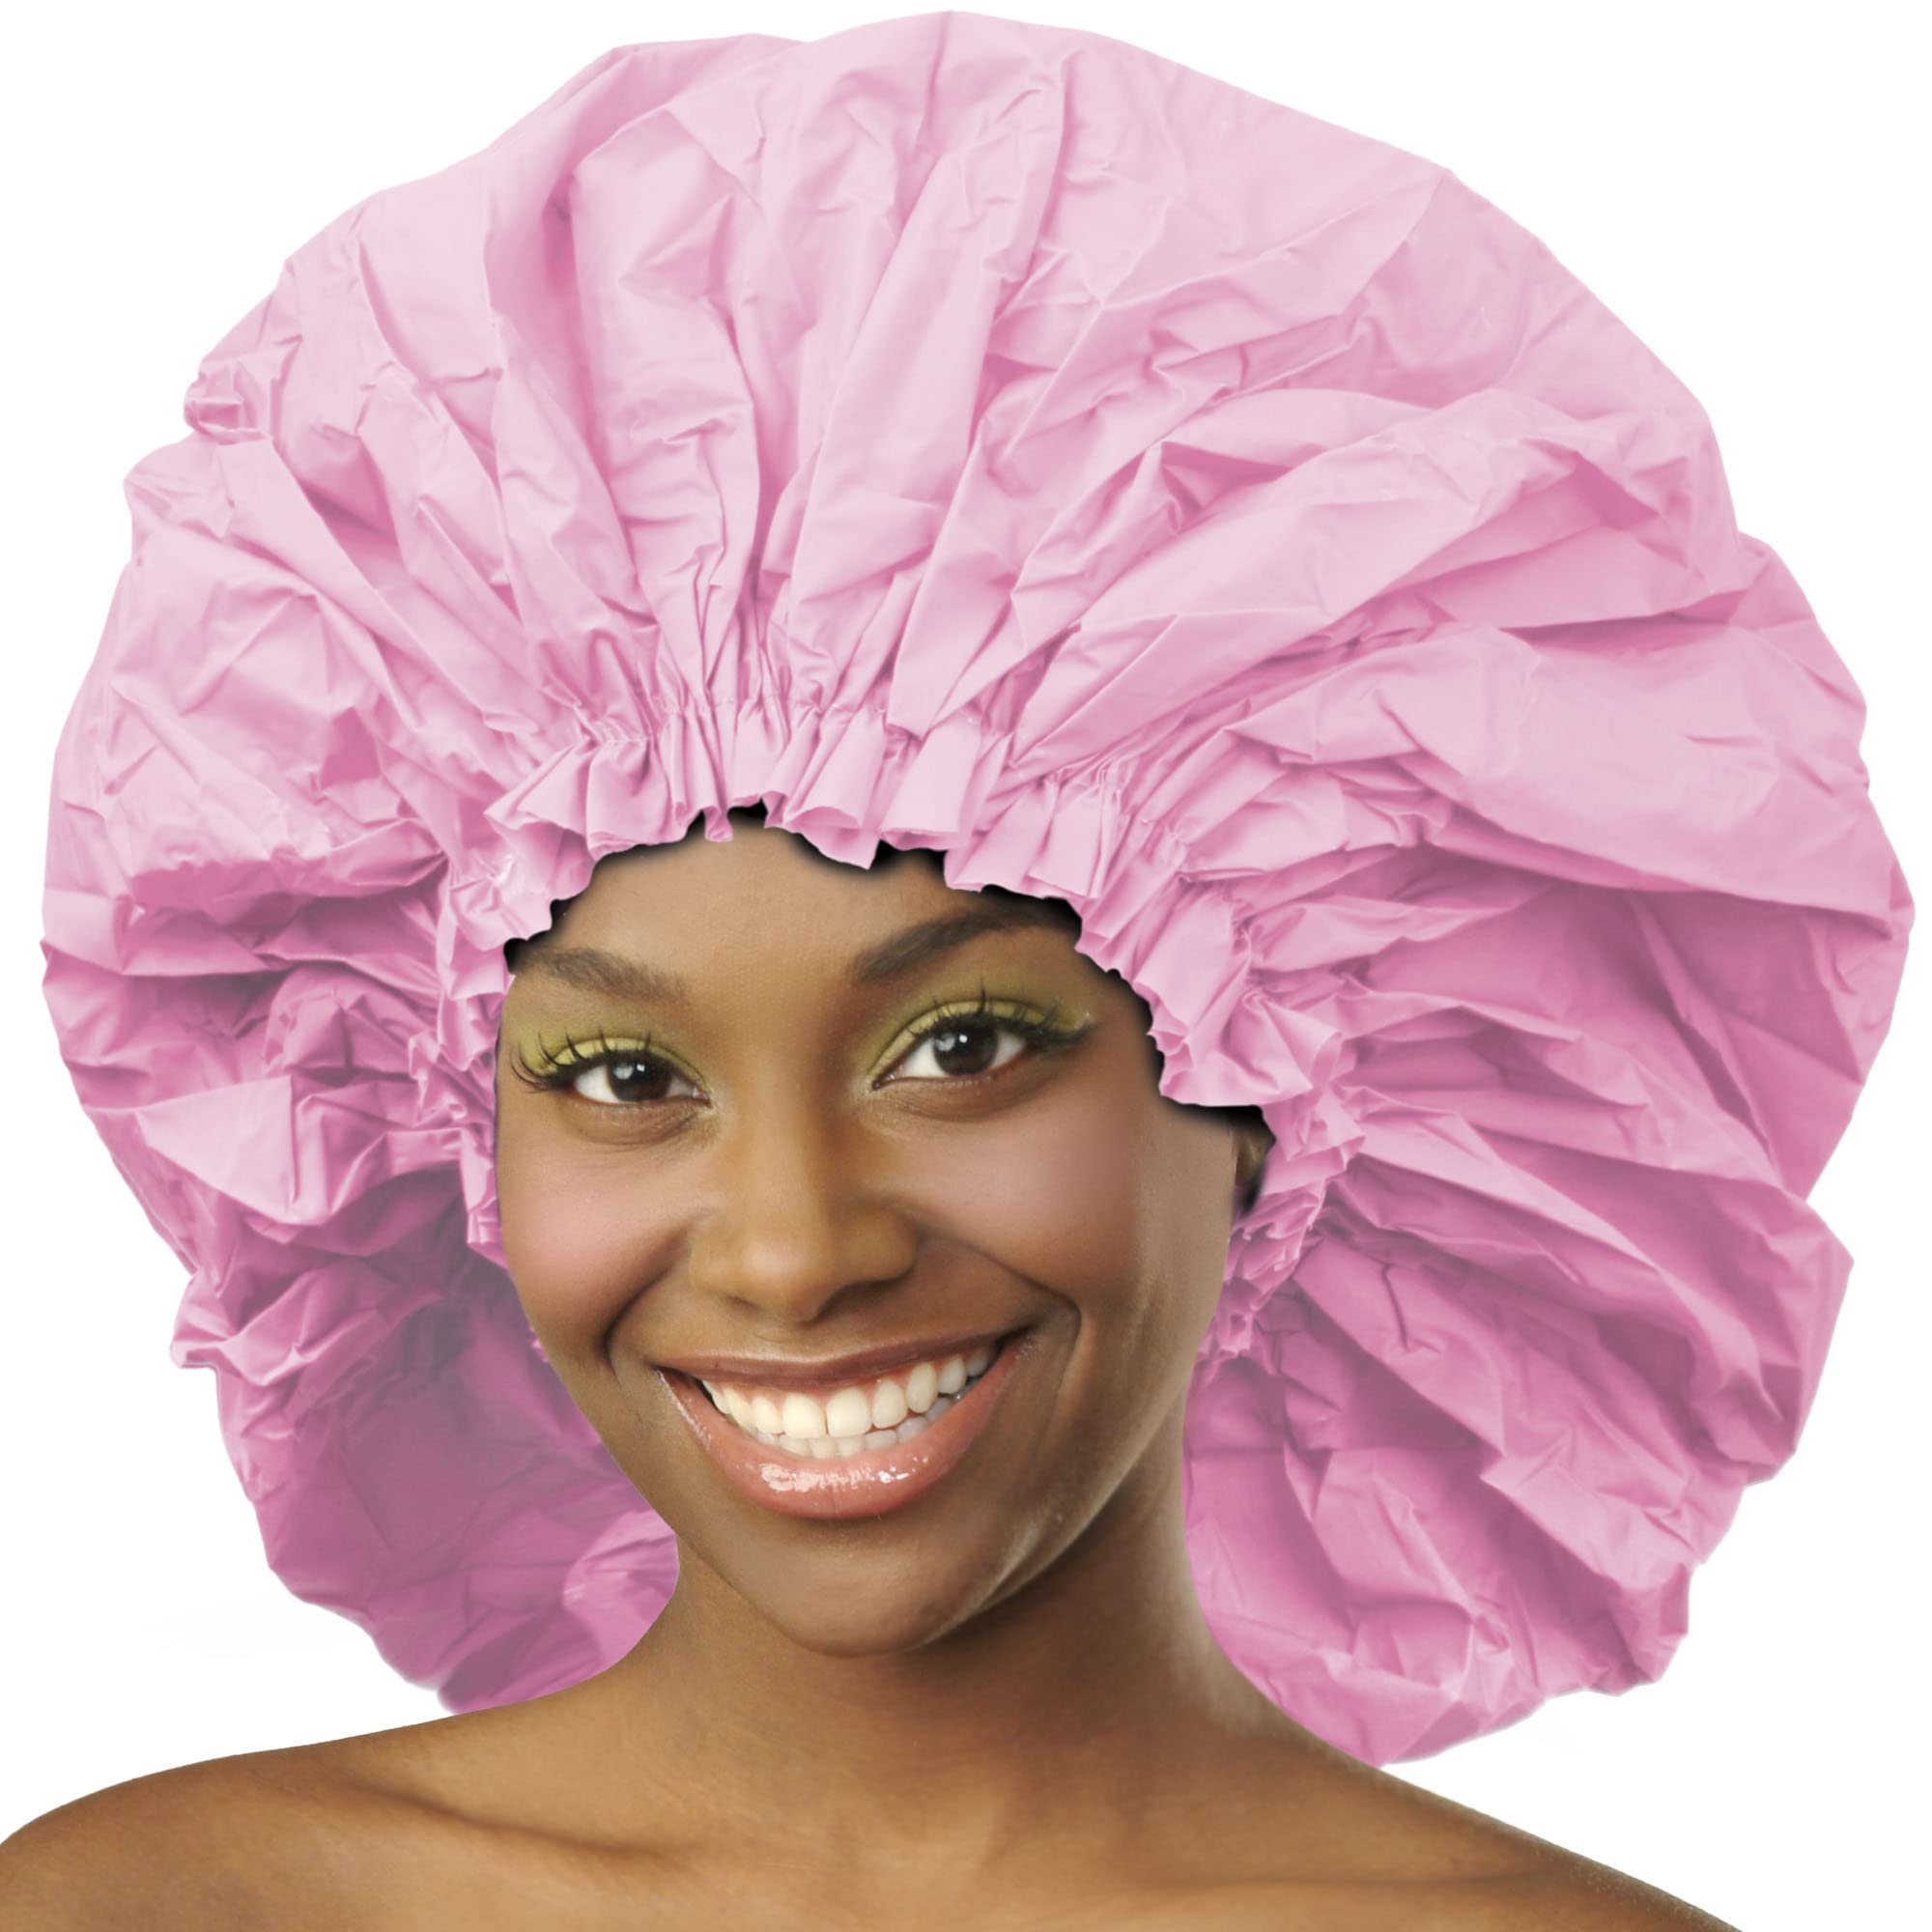 Donna Super Jumbo Shower Cap Waterproof Material 1pc for Women or Men Shower Cap for Roller Sets, Afros, Twist, Silk Wraps and More Reusable (PINK COLOR)